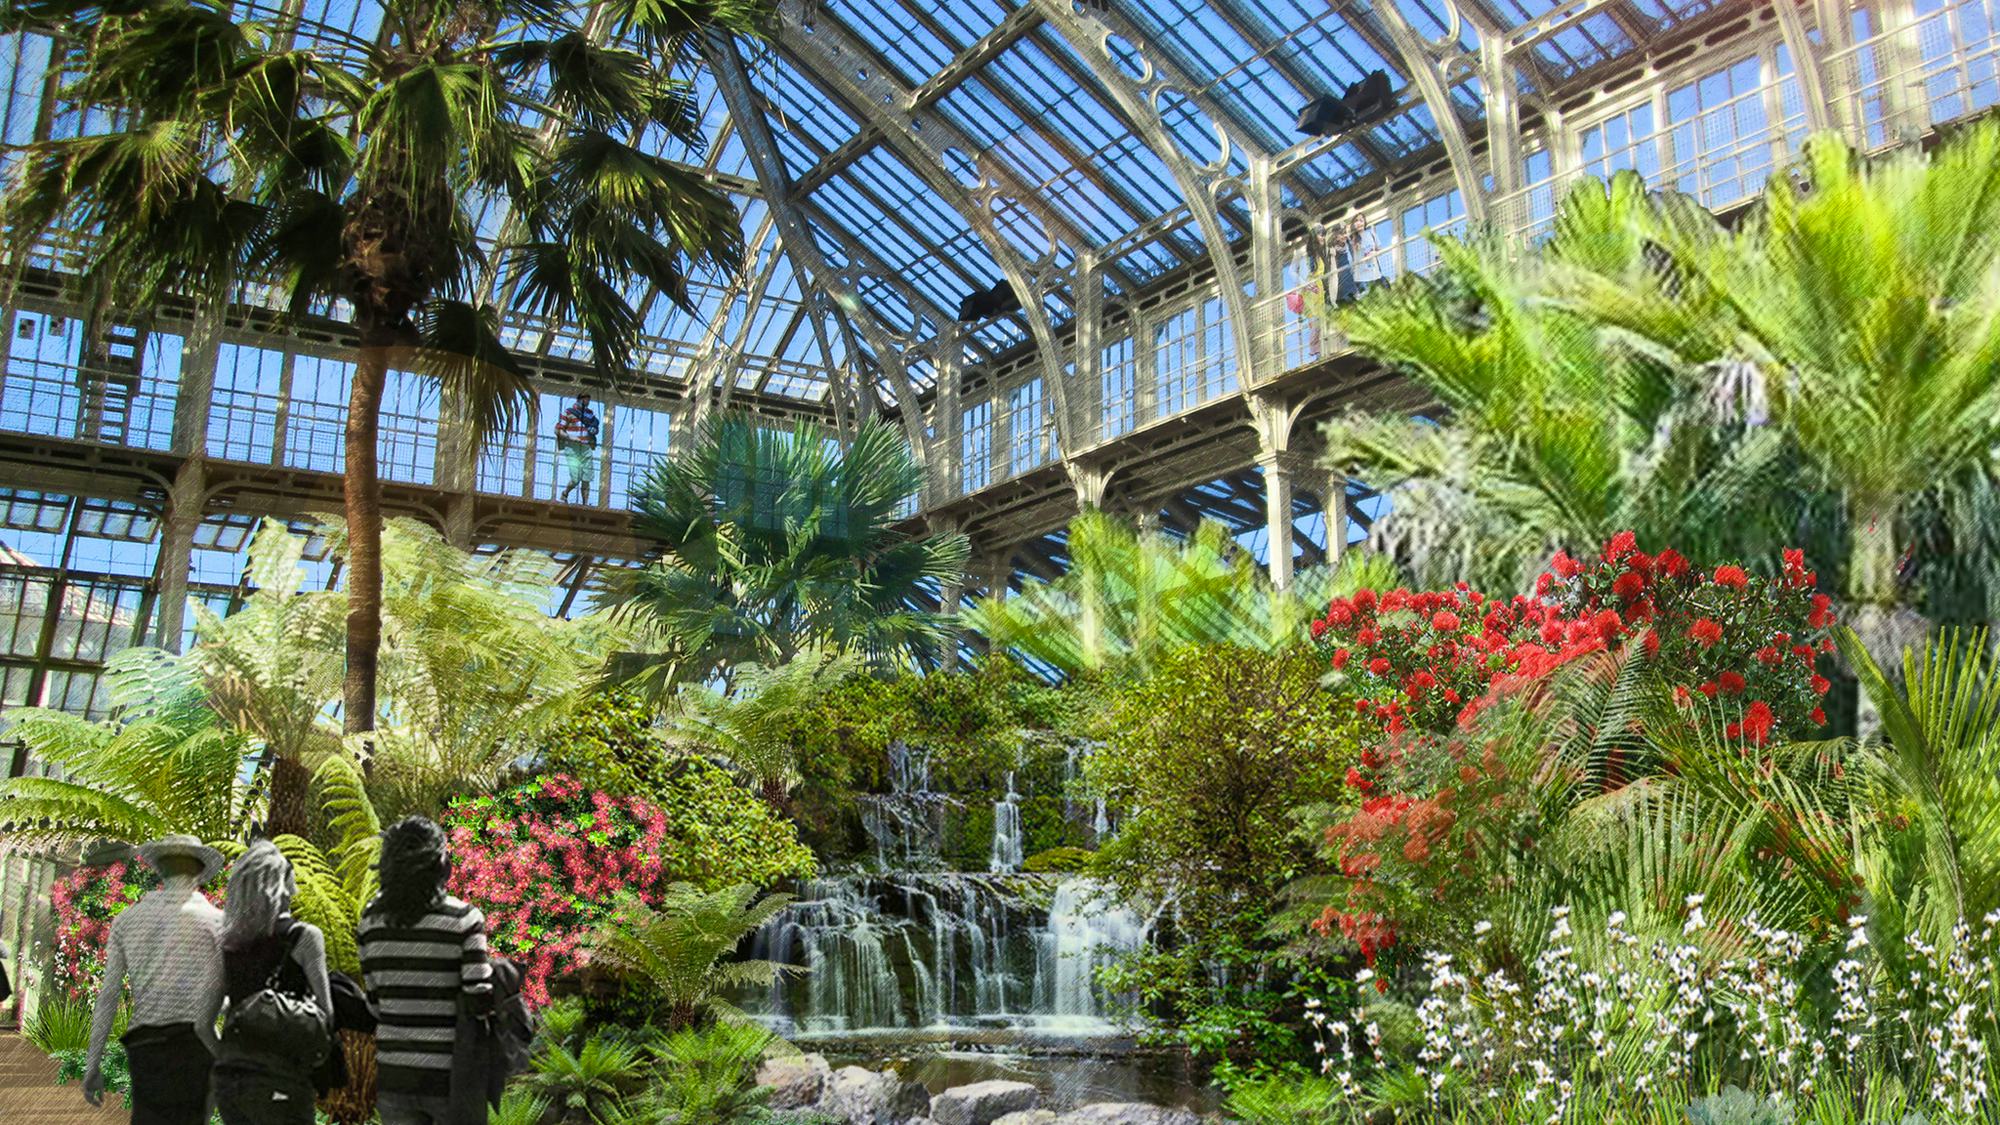 Kews Gardens Temperate House largest Victorian glasshouse in the world reopens 5 May 2018 event bookers